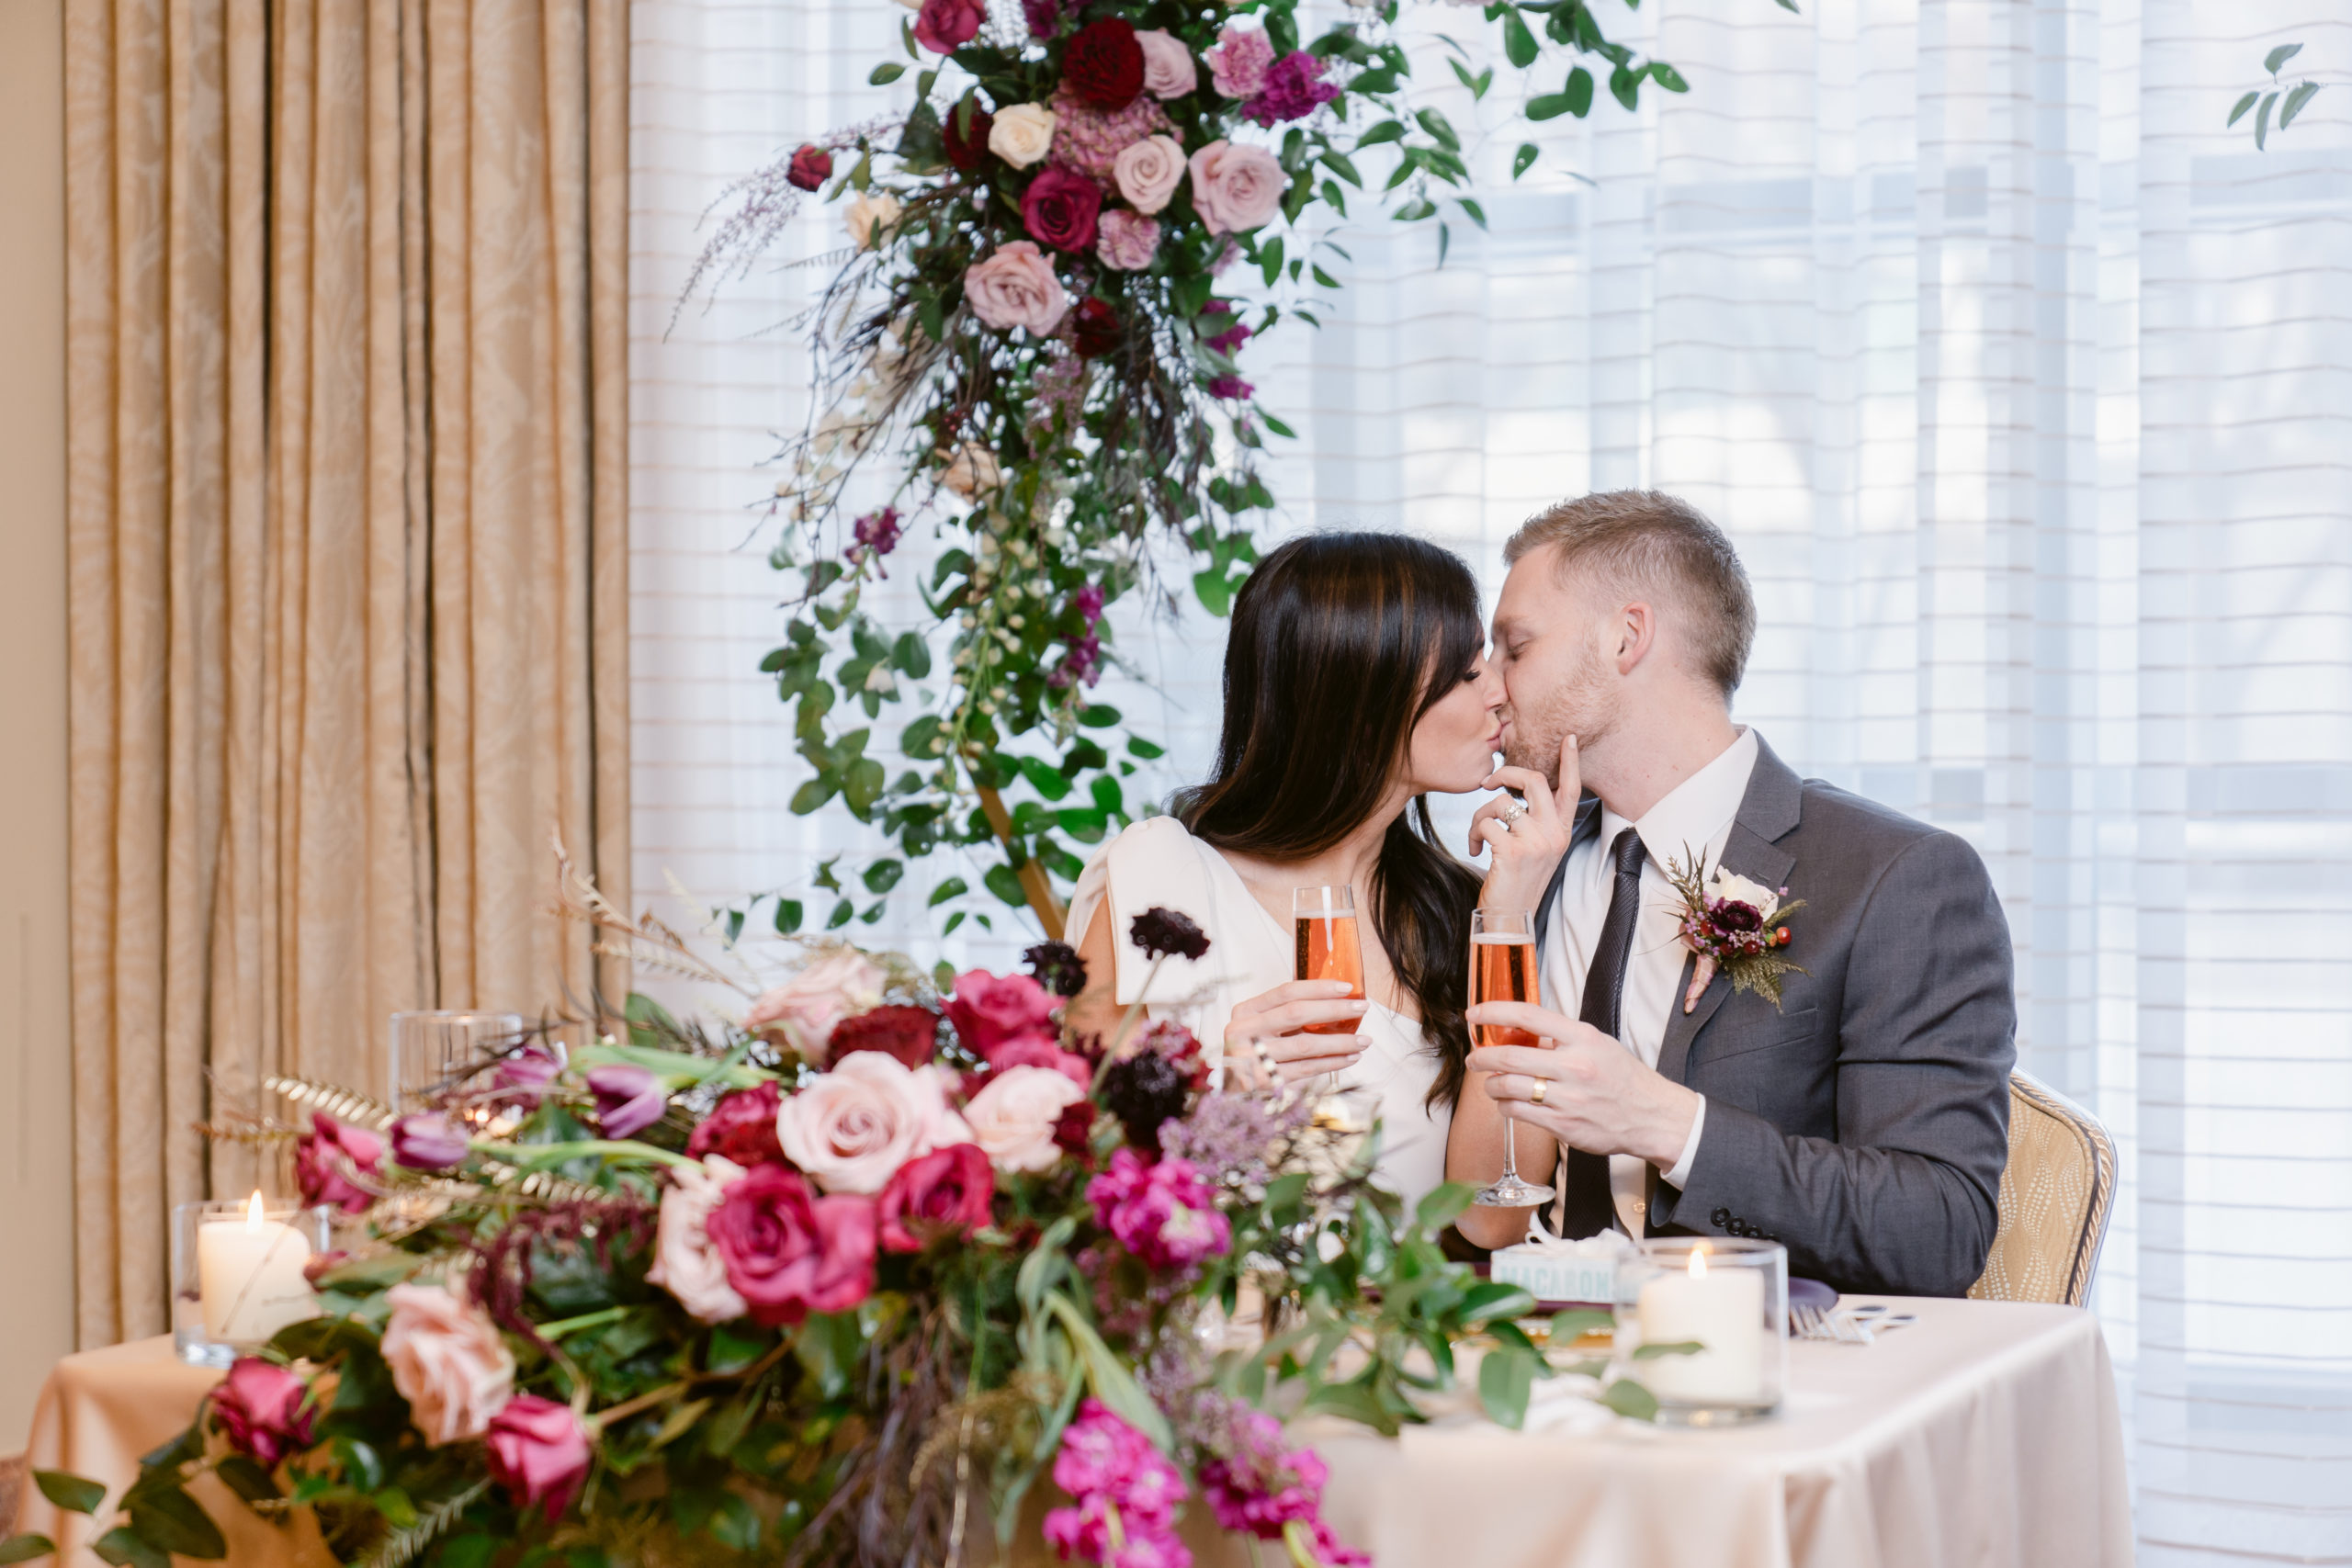 Bride and Groom kissing at their Sweetheart's Table decorated with pink and red florals..